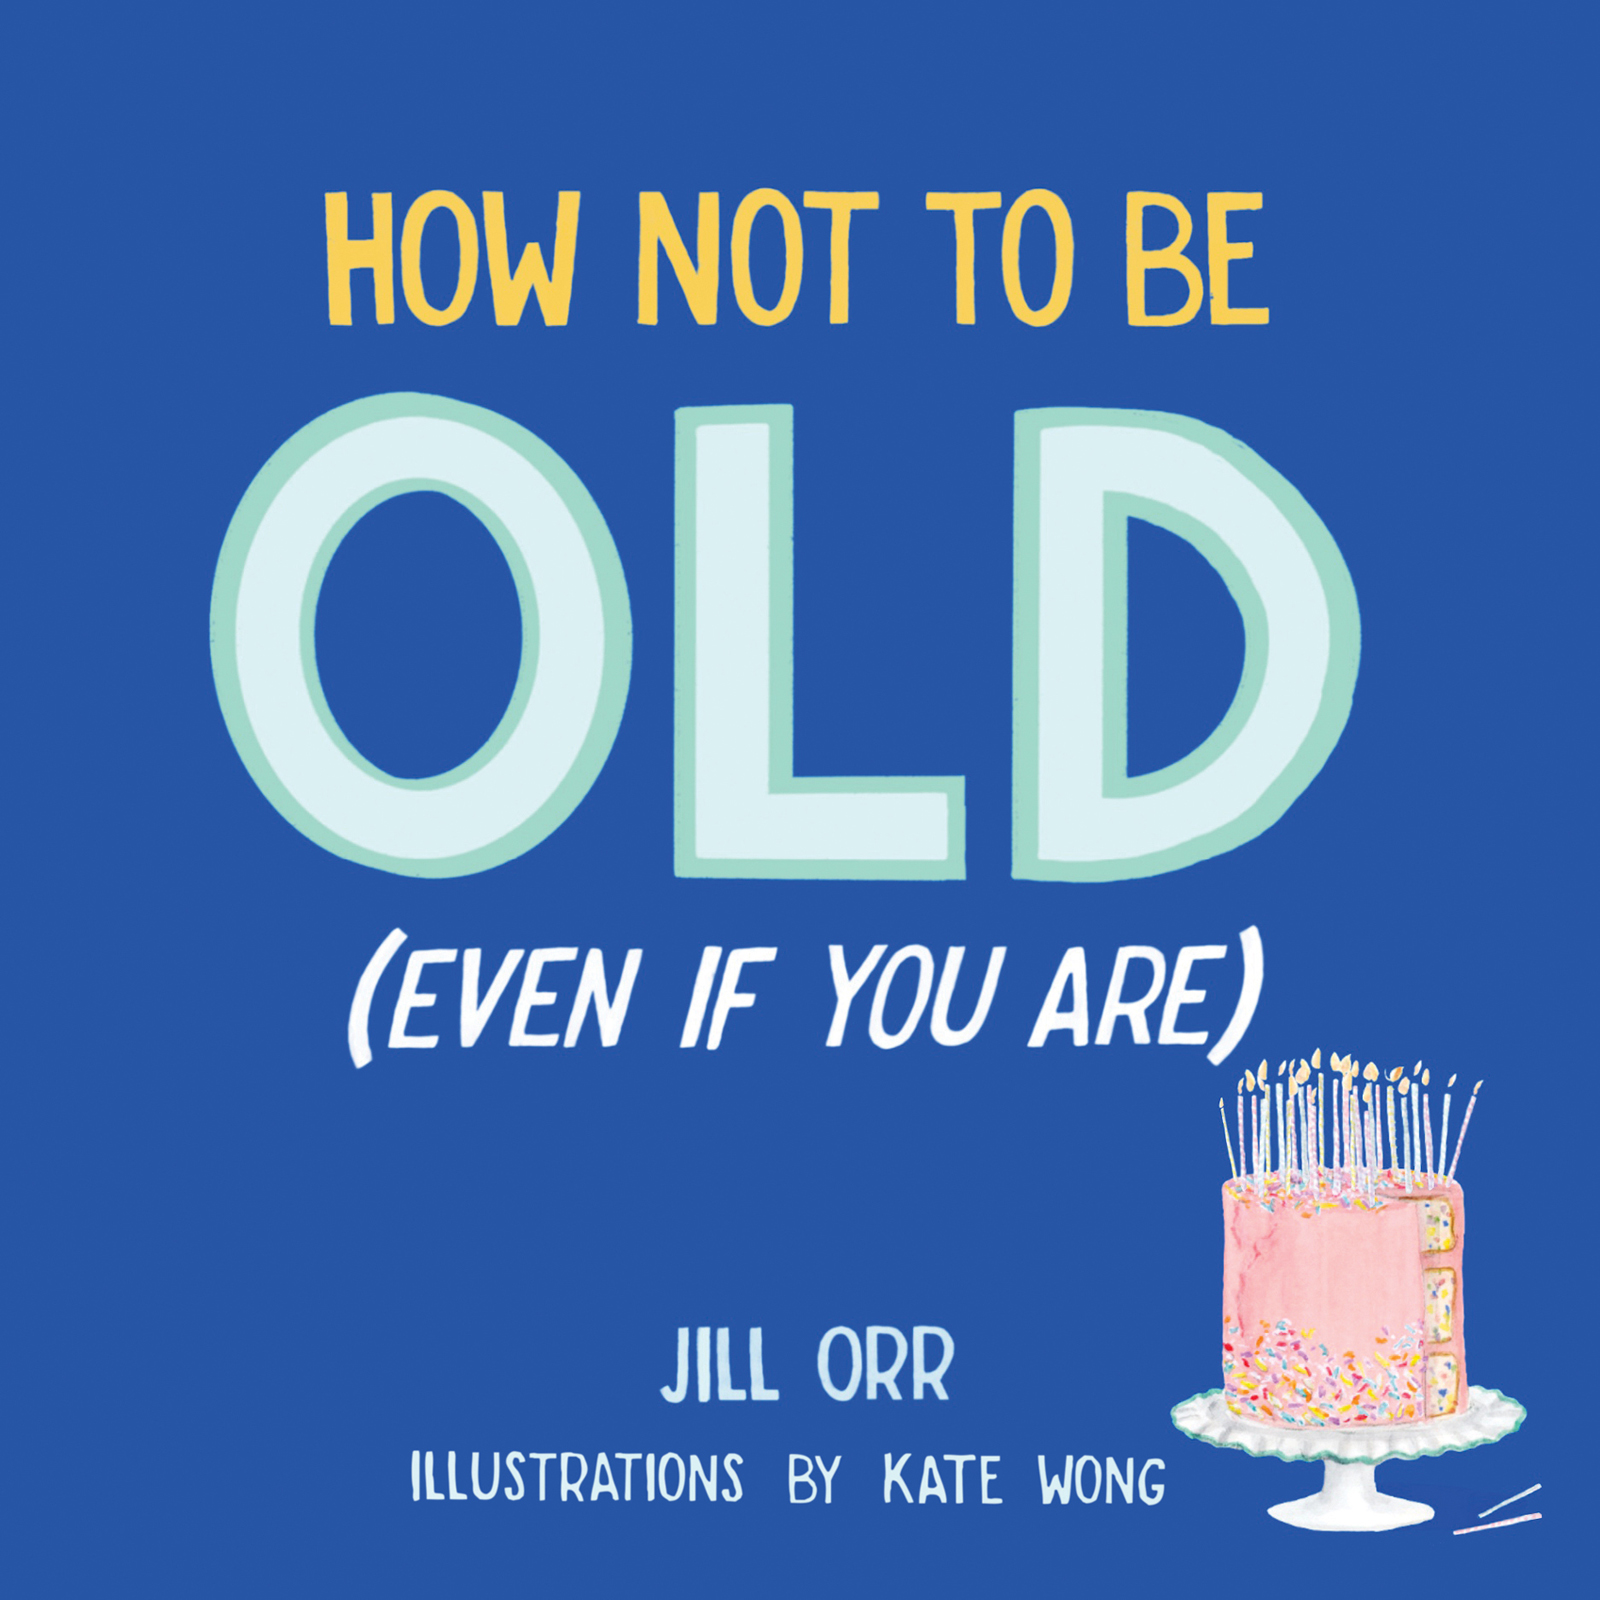 HOW NOT TO BE OLD EVEN IF YOU ARE Copyright 2020 by Jill Orr Illustrations - photo 1